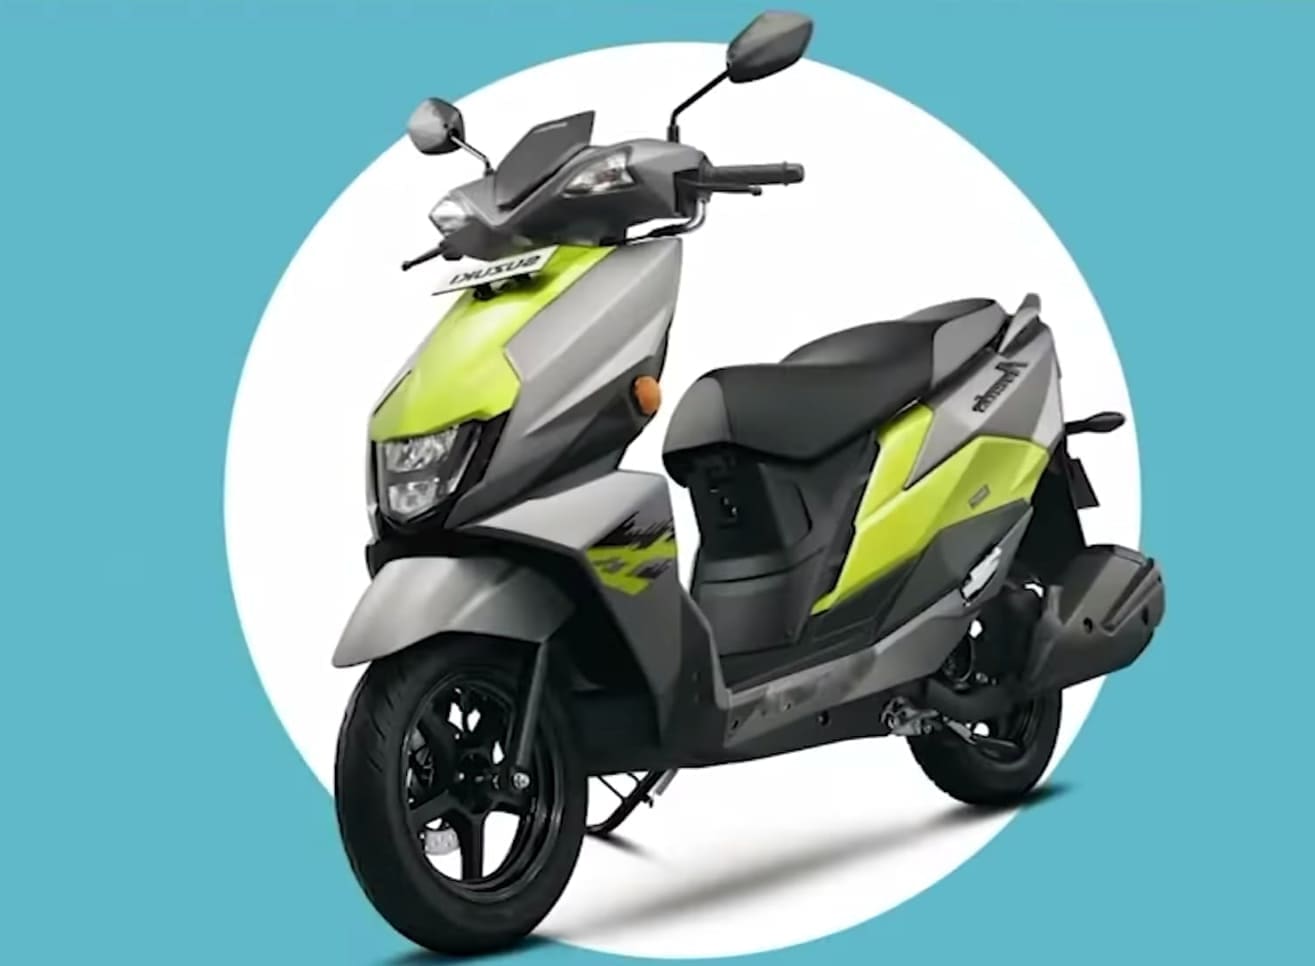 All-New Suzuki Avenis 125 Scooter-Coming Soon In Nepal.